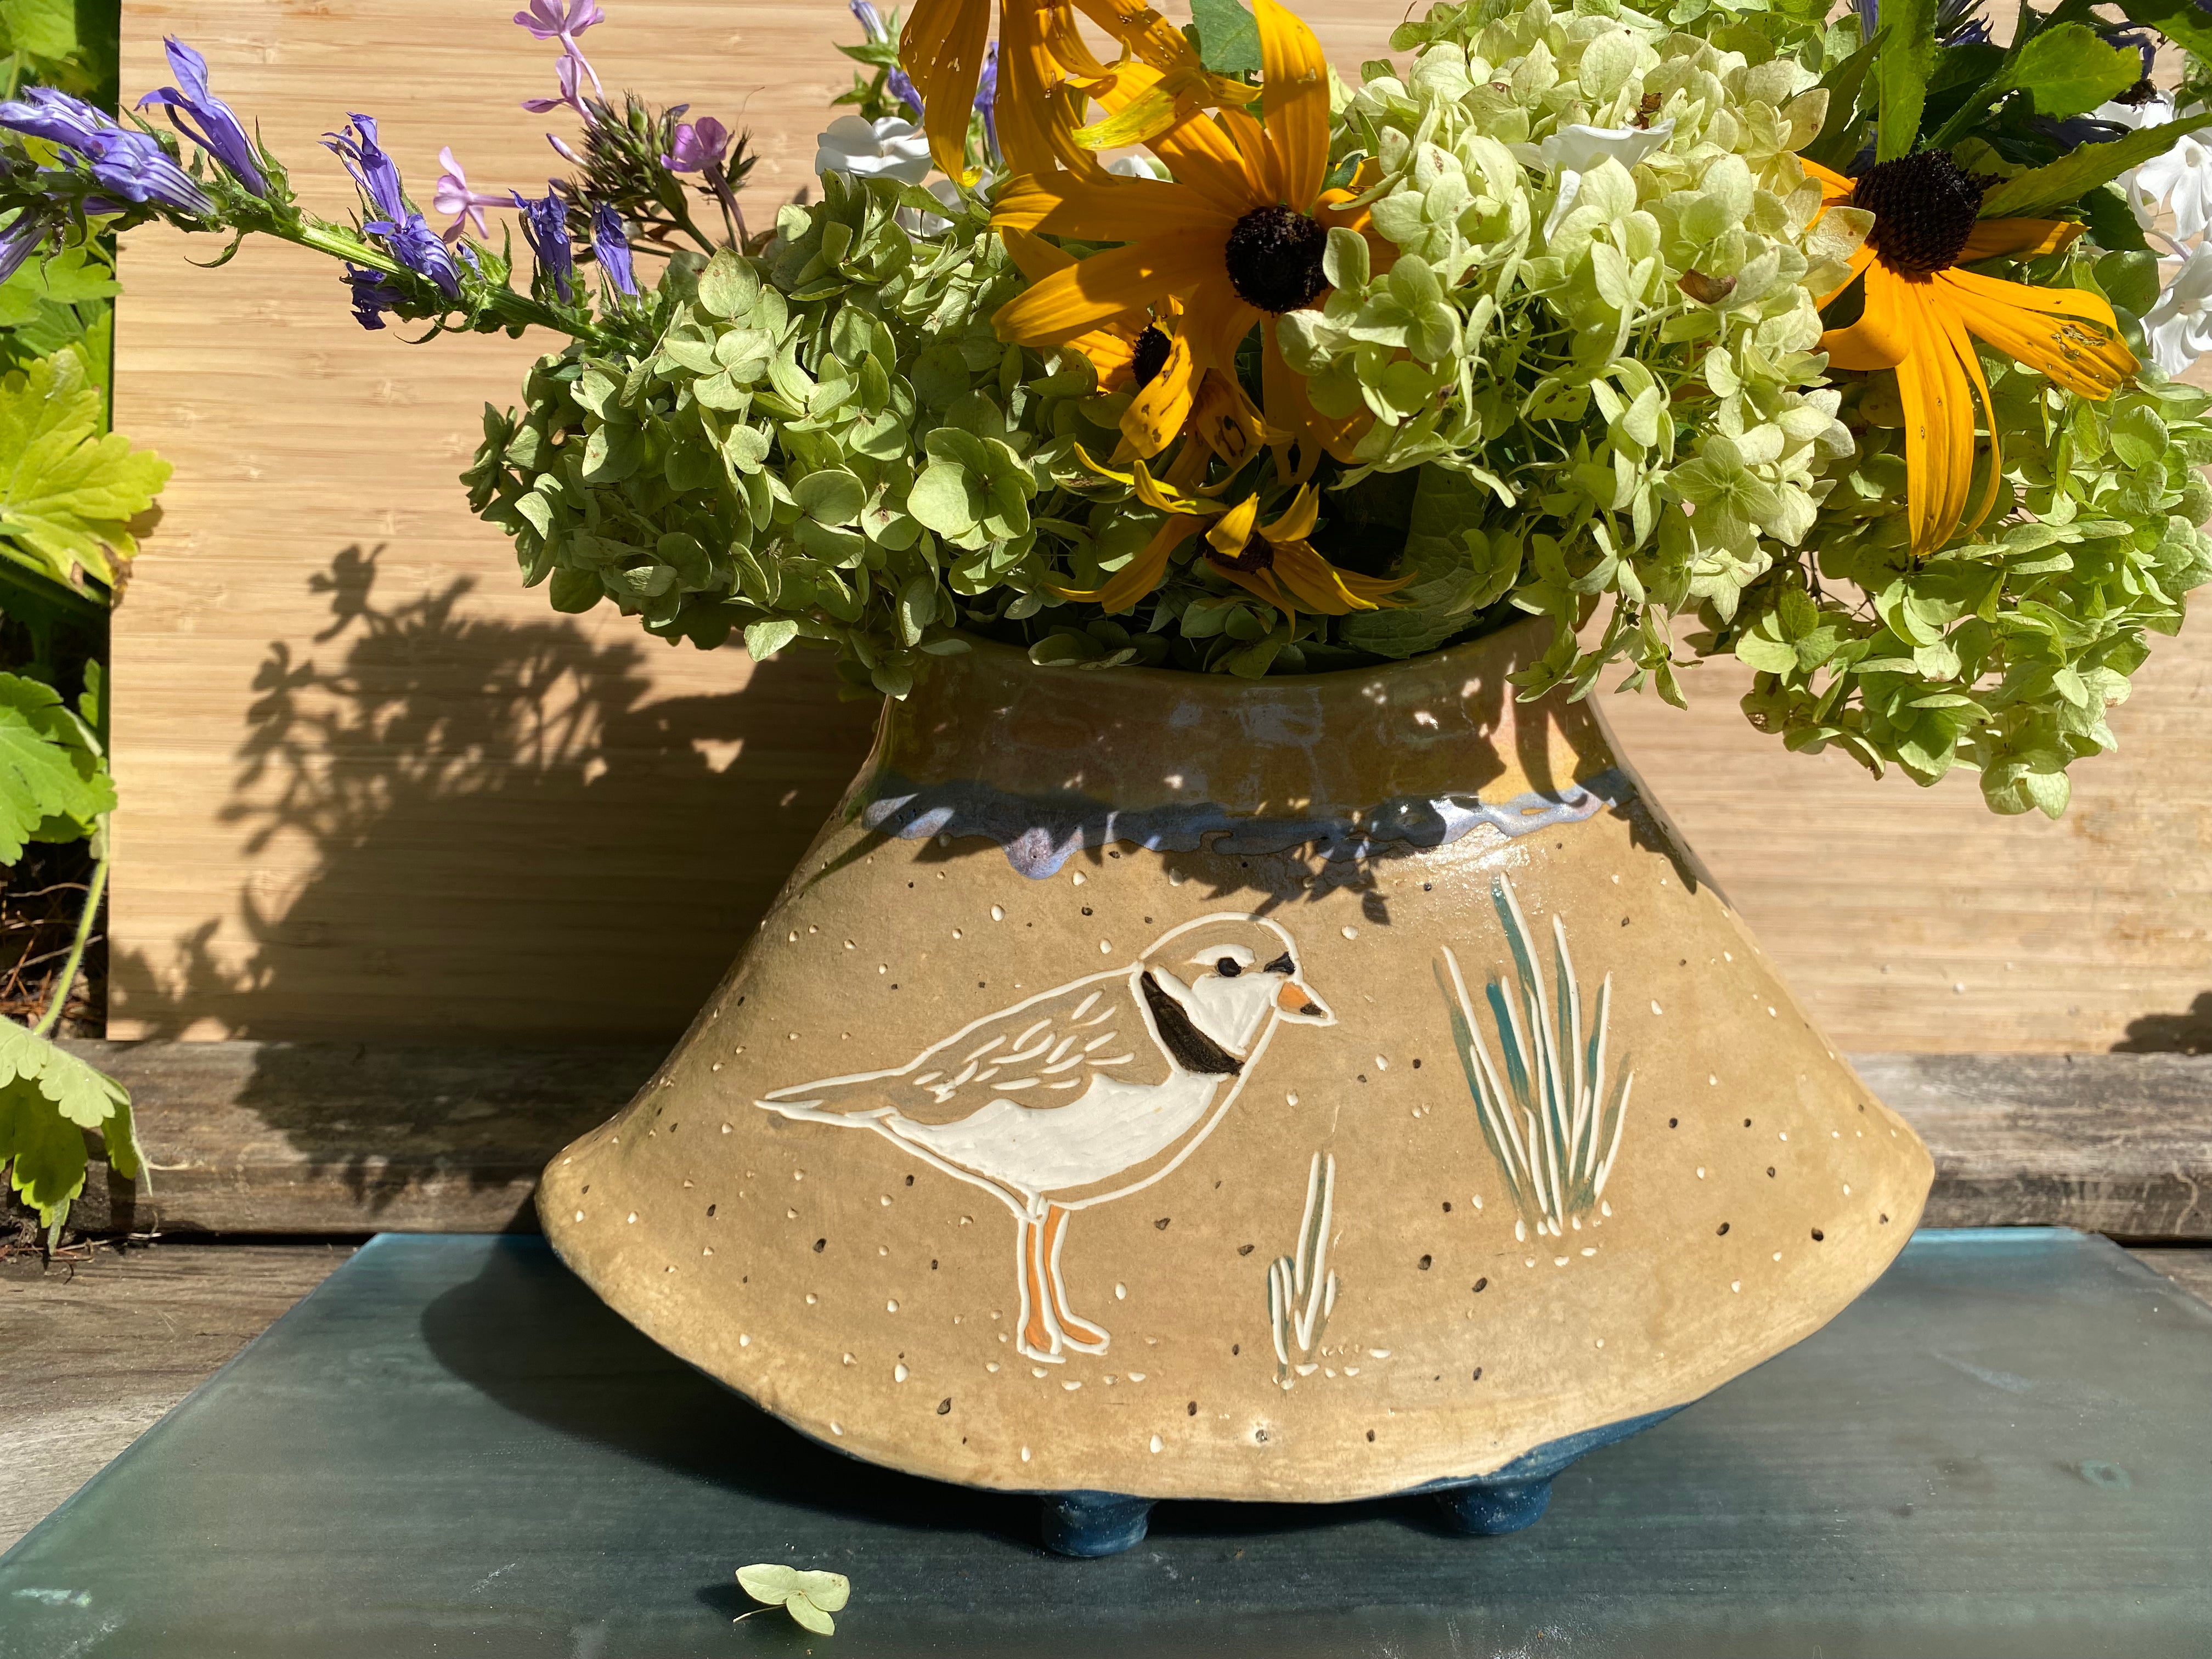 Piping Plover Zoid Vase in Cream Sunset